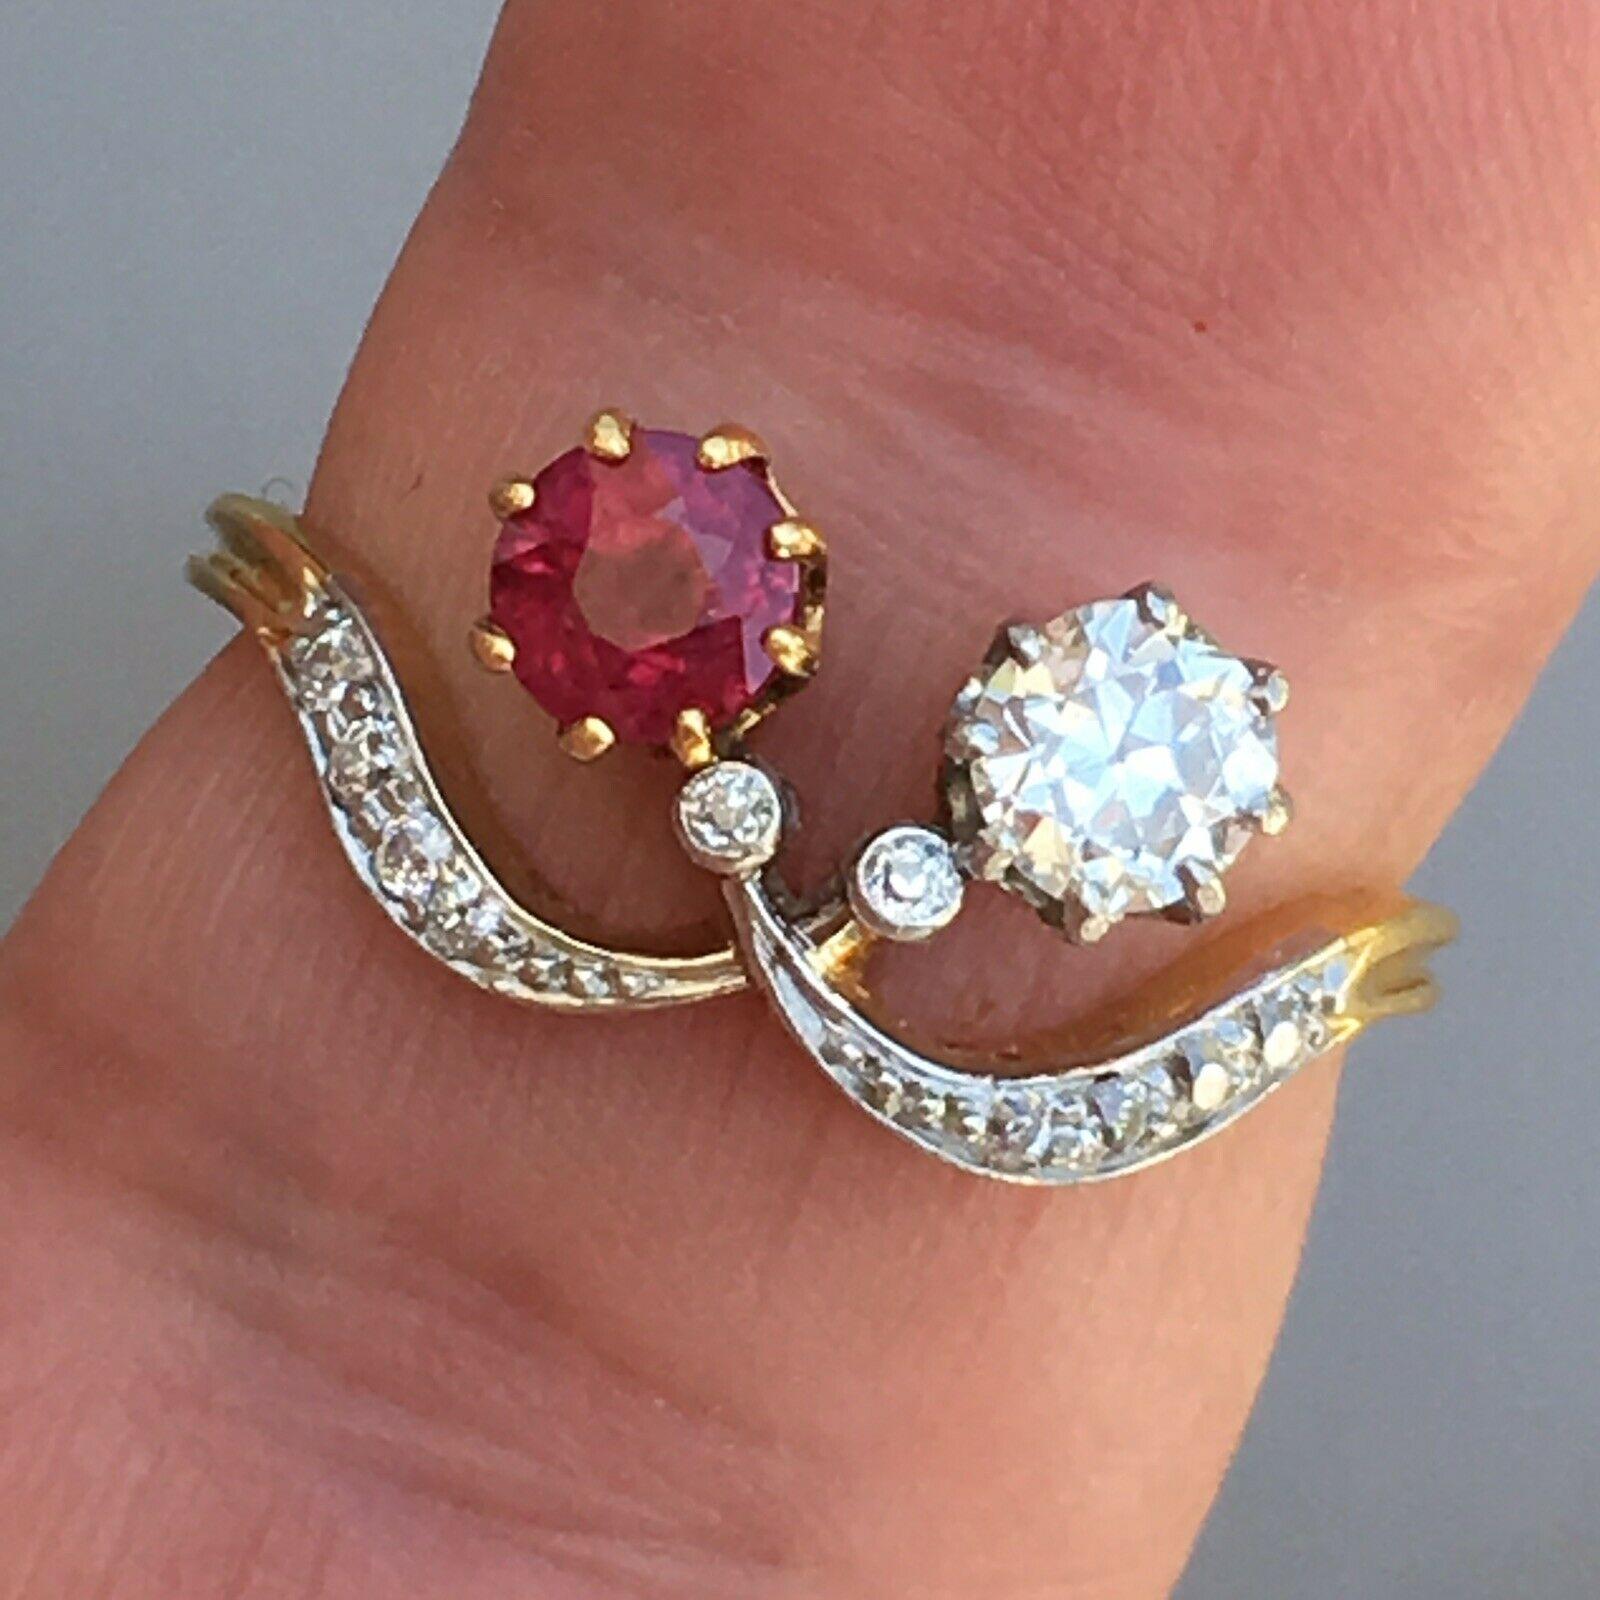 Edwardian 1900s Antique 1/2 Ct Burma Ruby and 1/3 Ct Old European Cut Diamond Ring in Toi et Moi Style 

3.3 gram 18 Karat yellow Gold Platinum topped lady's ring circa 1900s, Edwardian era, appx. 1/2 Carat Burmese Ruby and an appx 1/3 Carat Old